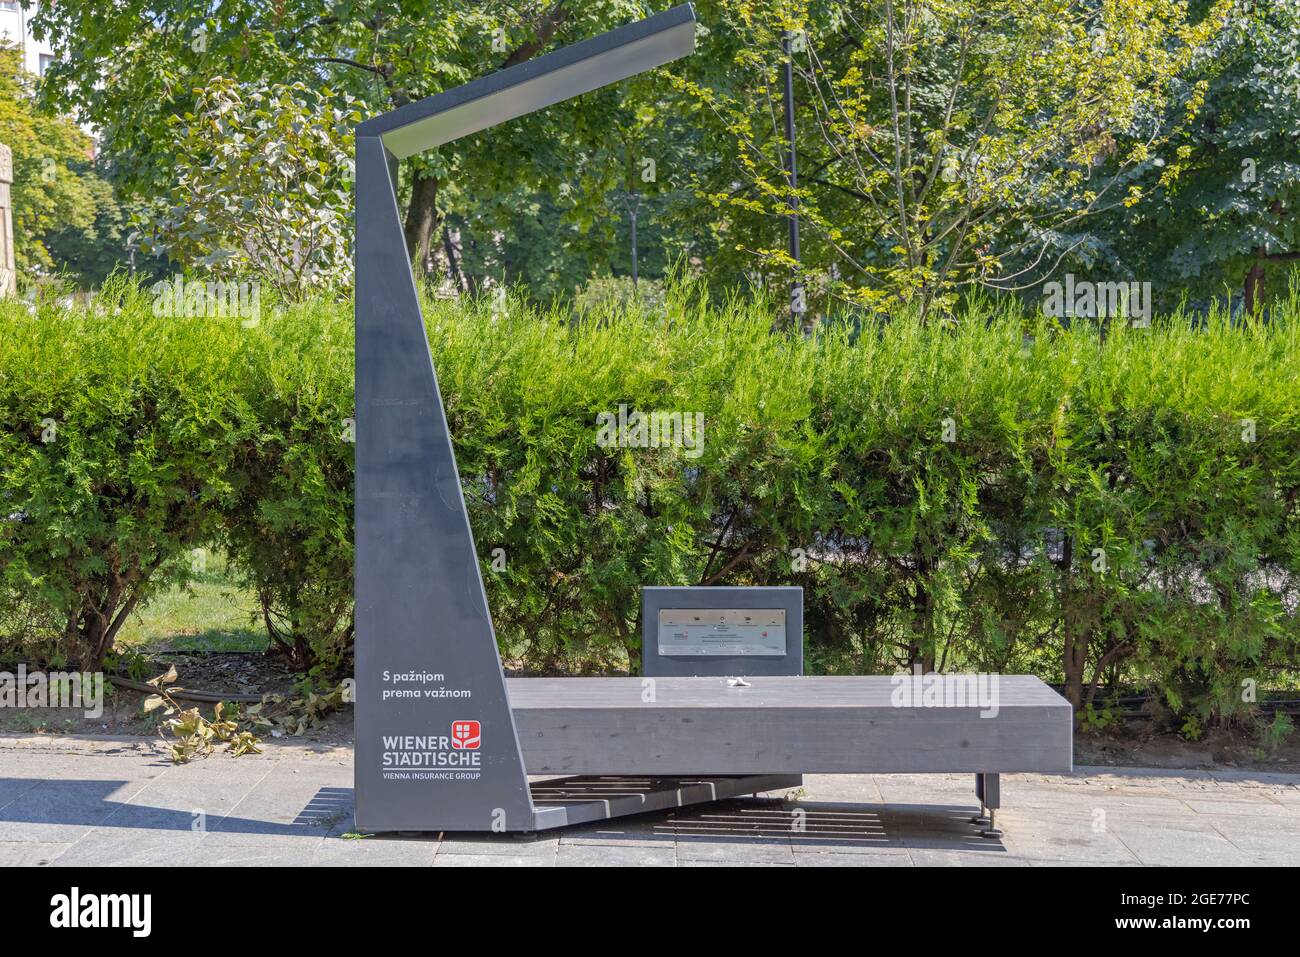 Belgrade, Serbia - August 08, 2021: Smart Bench WiFi and Solar Charging in City Park at Sunny Summer Day. Stock Photo